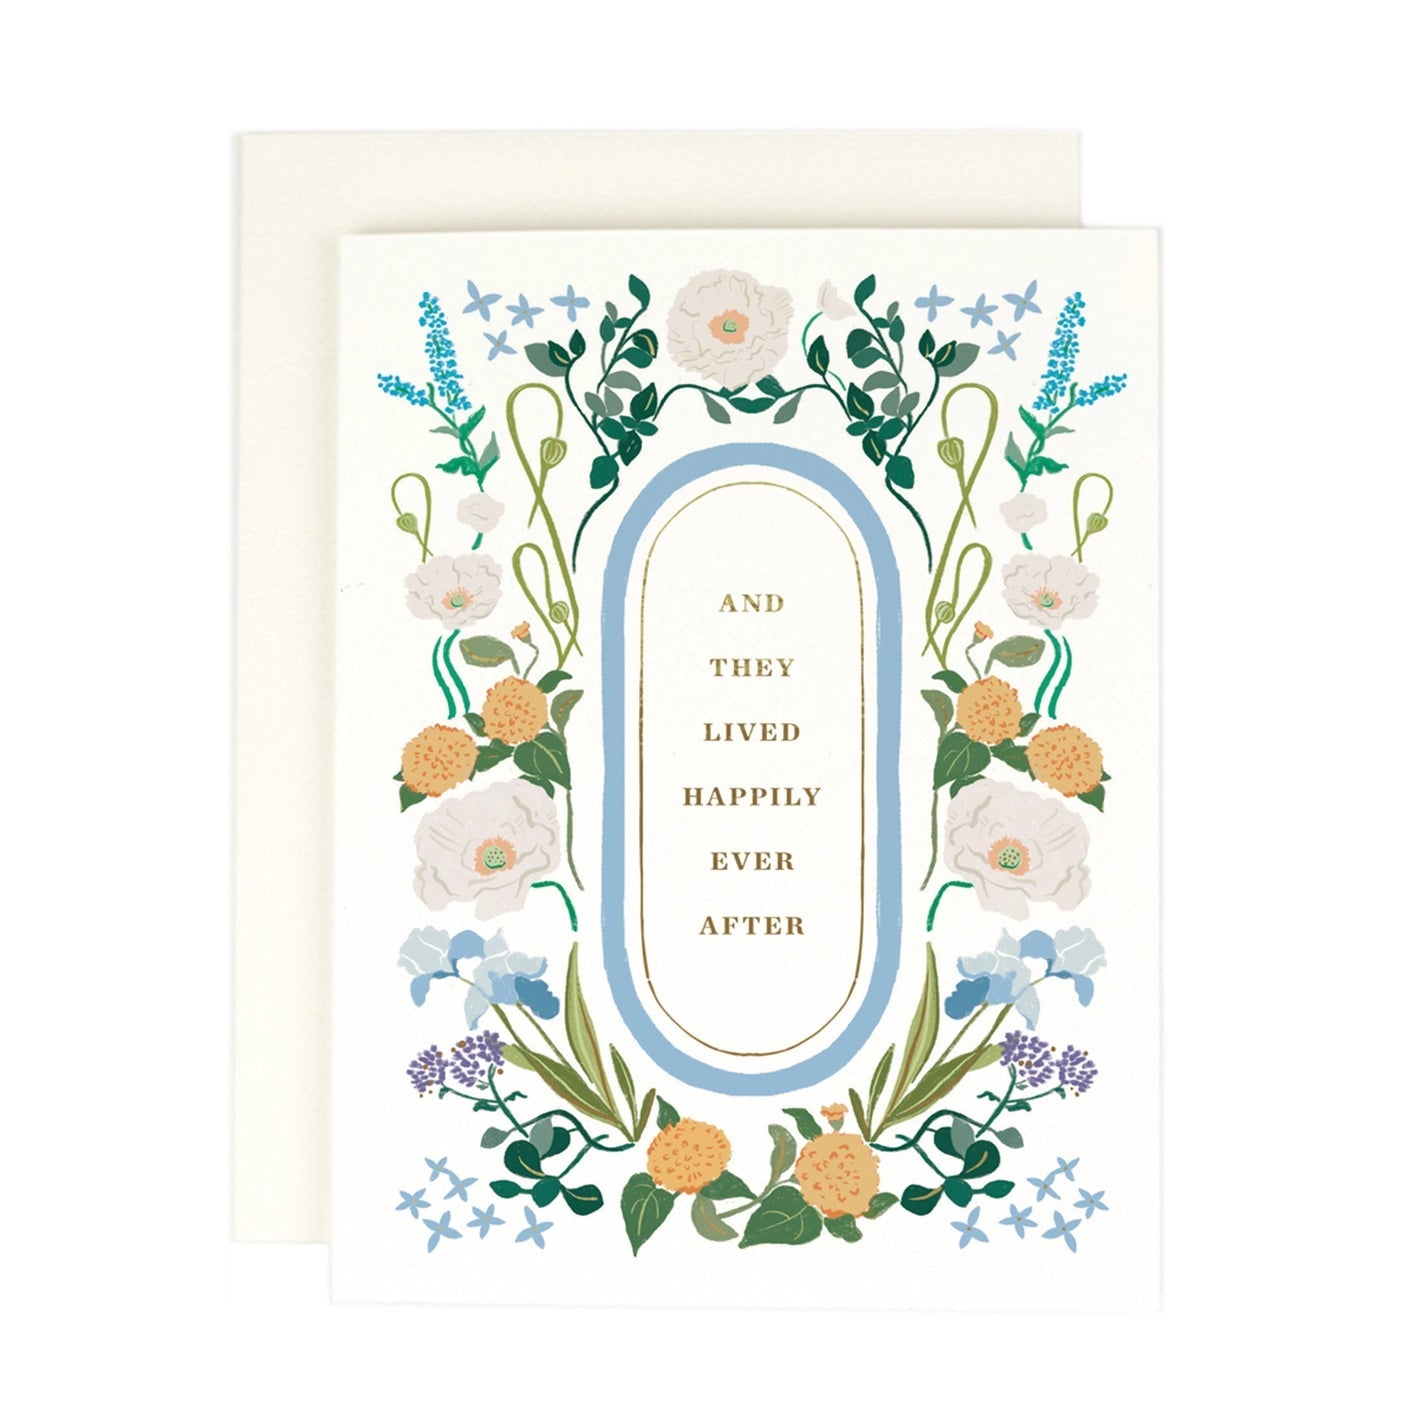 Happily Ever After Floral Card - Spring Sweet